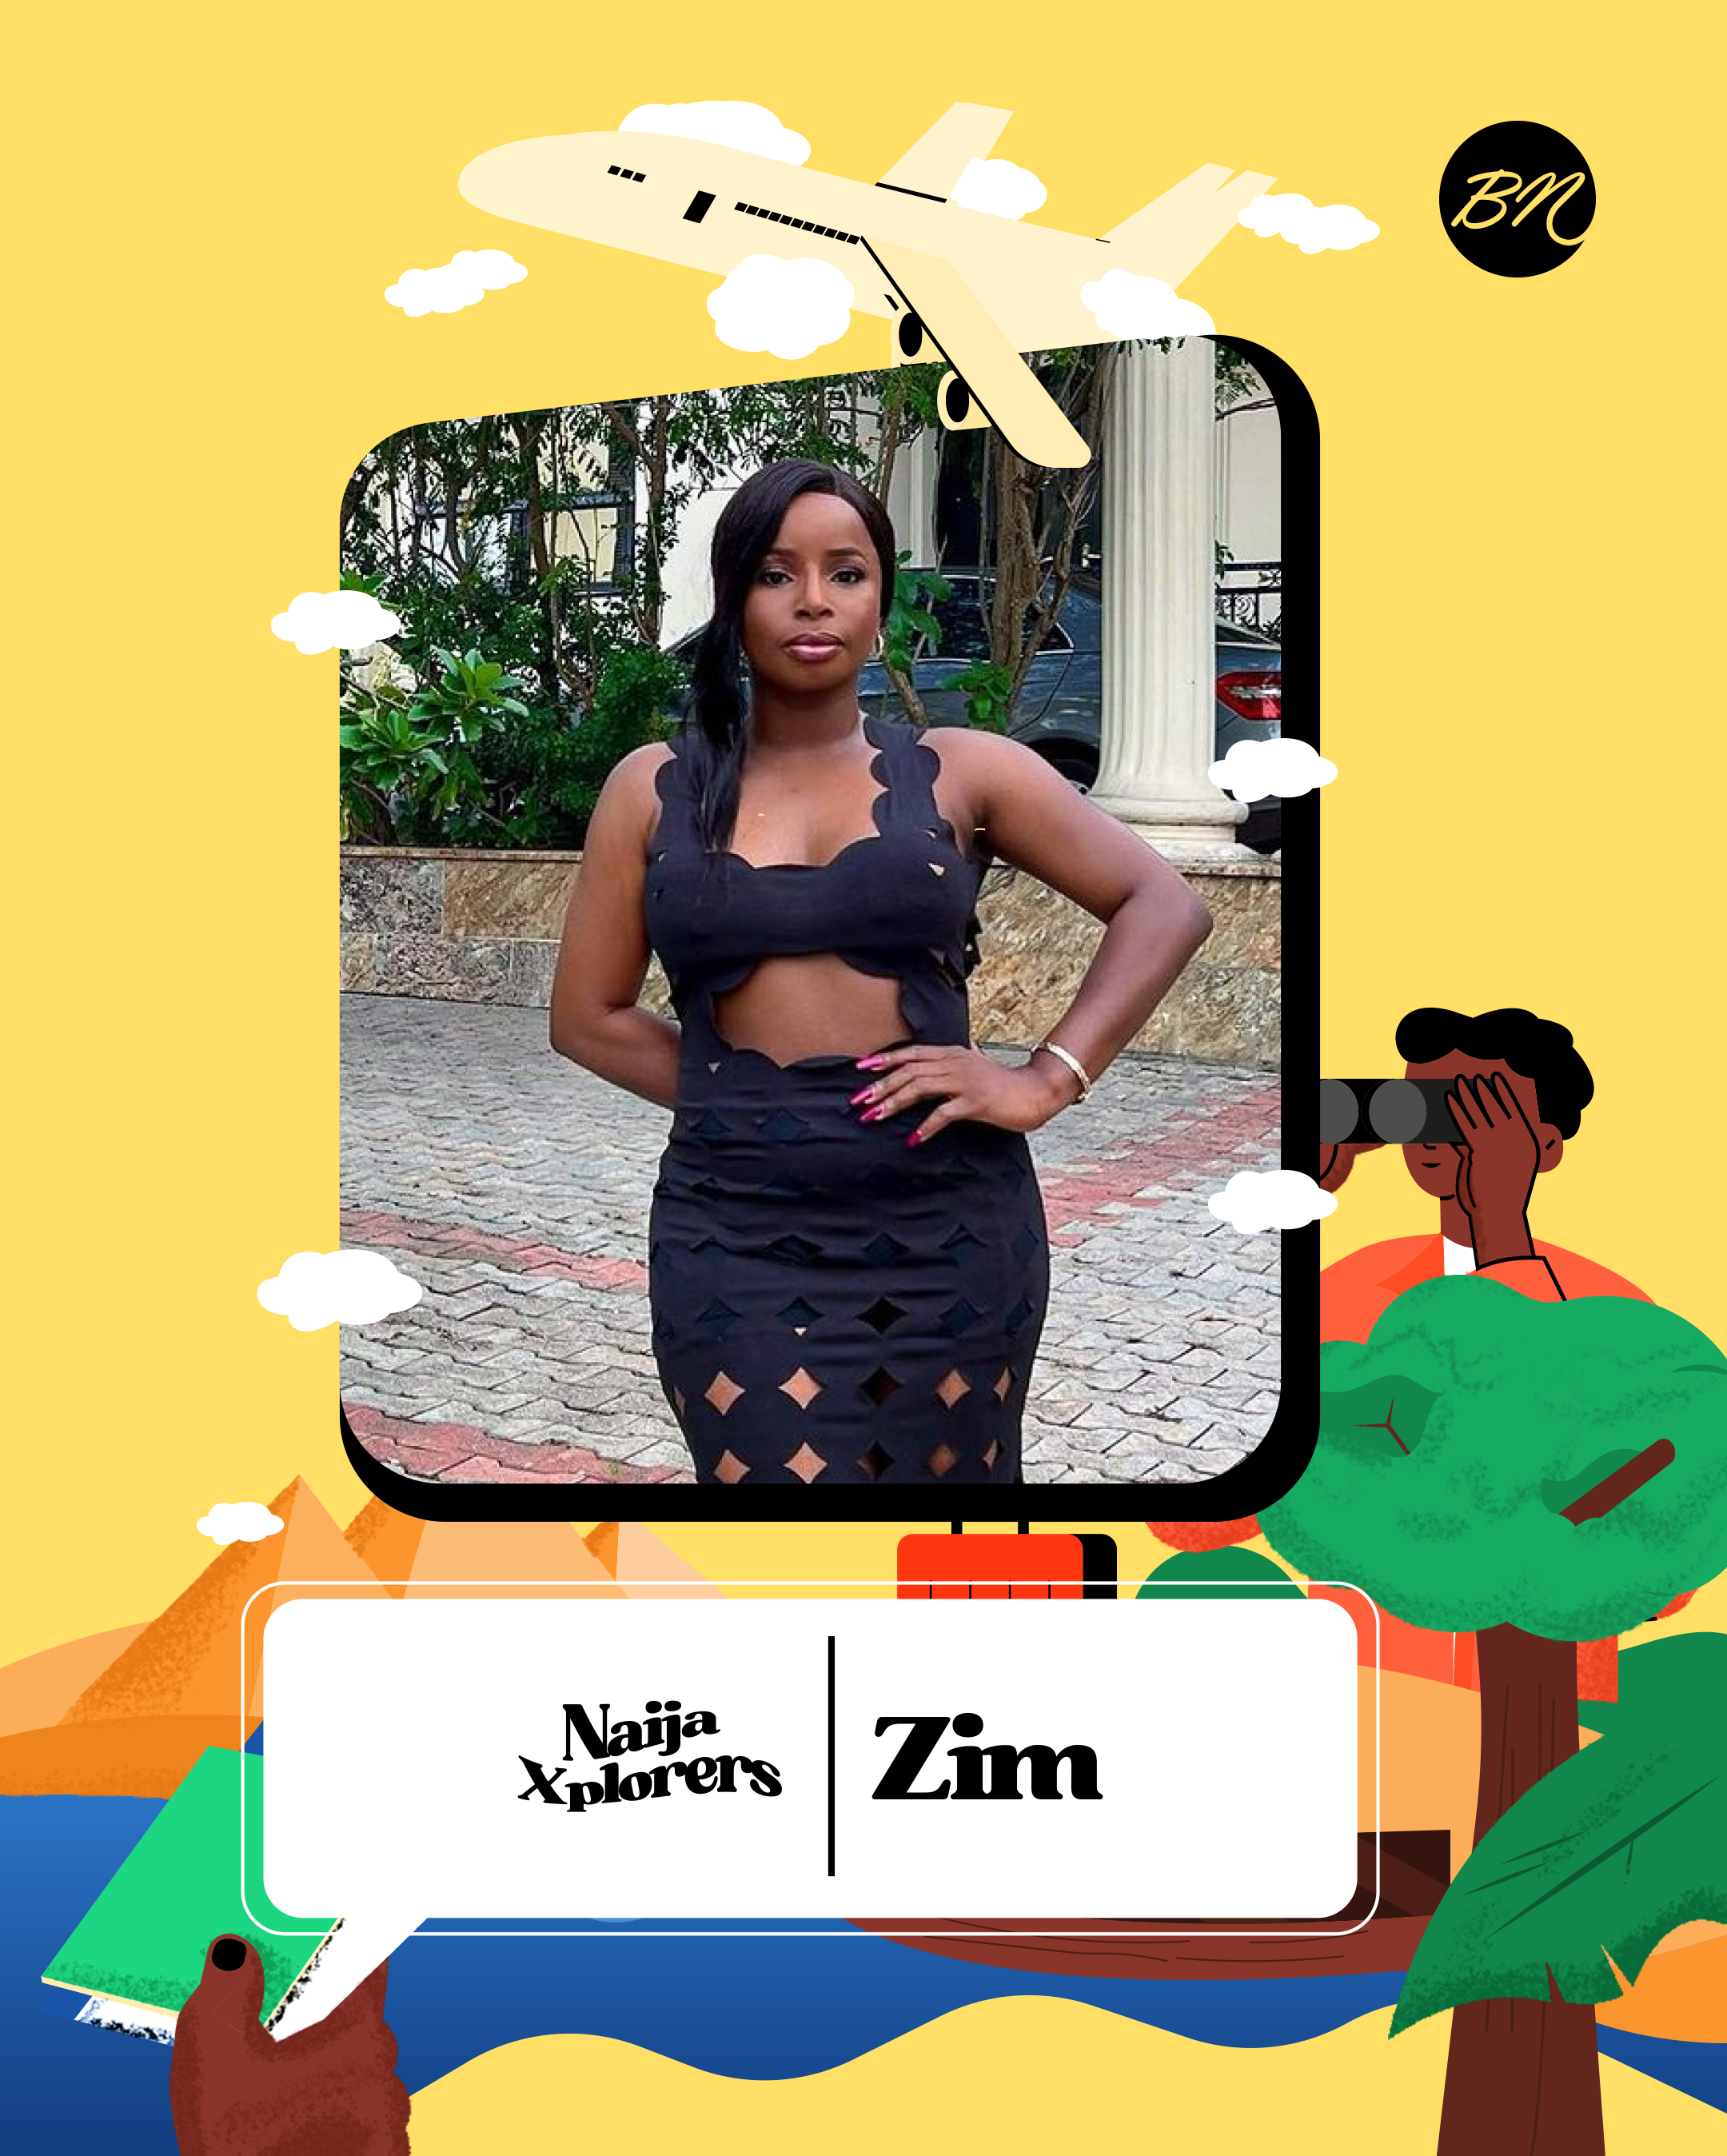 Zim Gives Us a Glimpse into Her Life as a Travel Curator in this Episode of “Naija Xplorers”